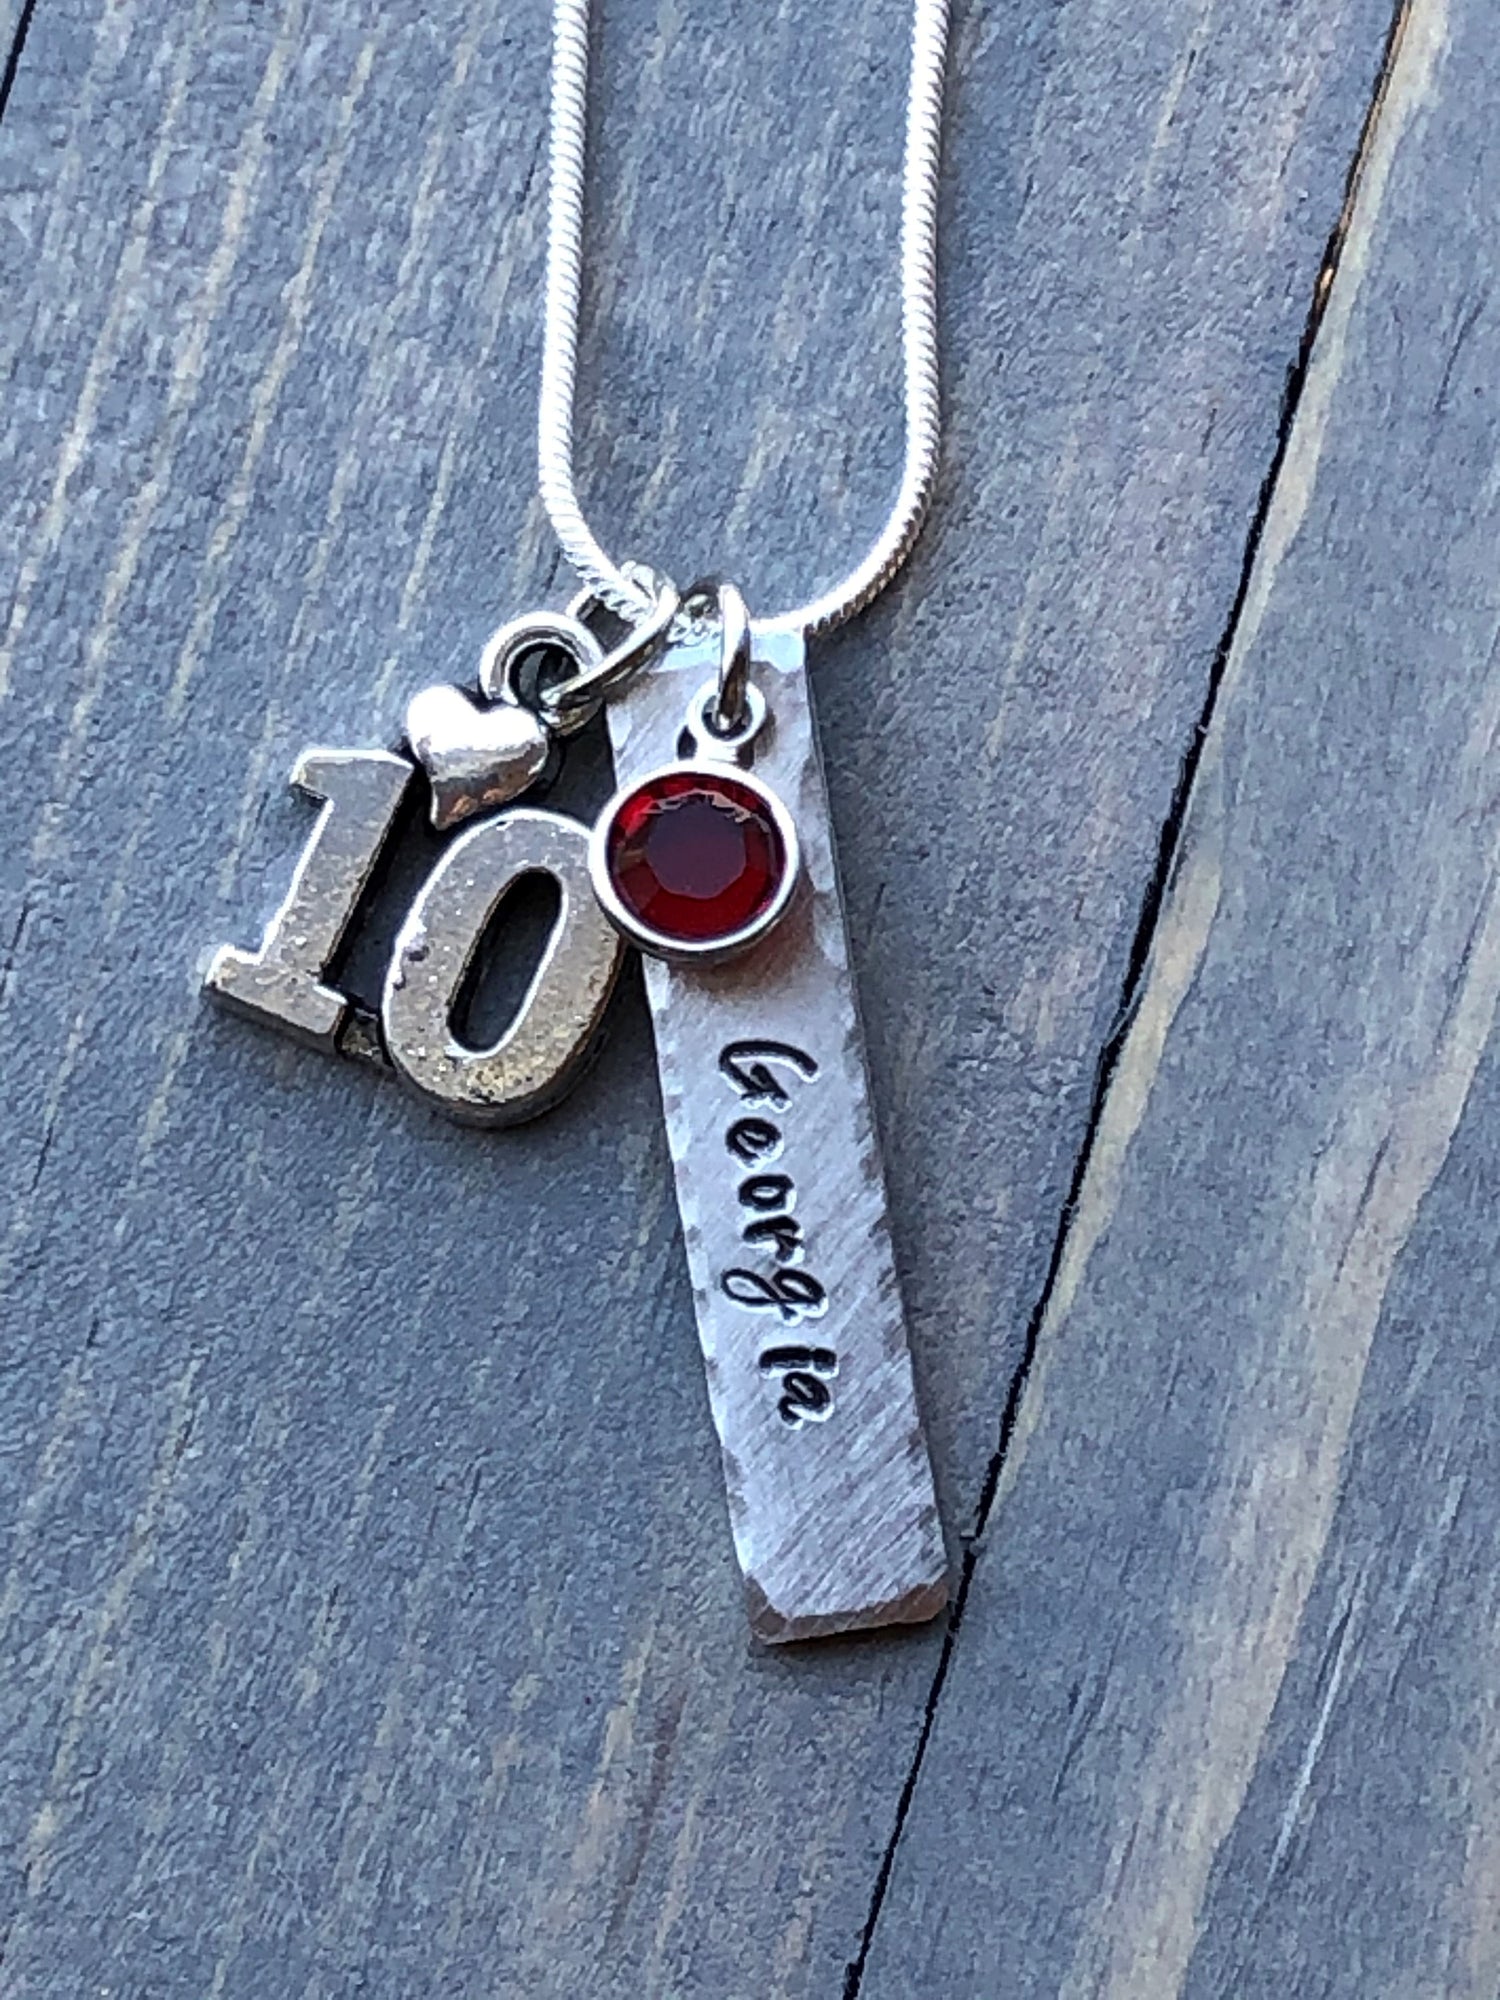 11th Birthday Necklace, Gift for Girl, Personalized Necklace, Birthstone Necklace, Gift for Girl&#39;s 11th birday, Turning 11, Add a Charm